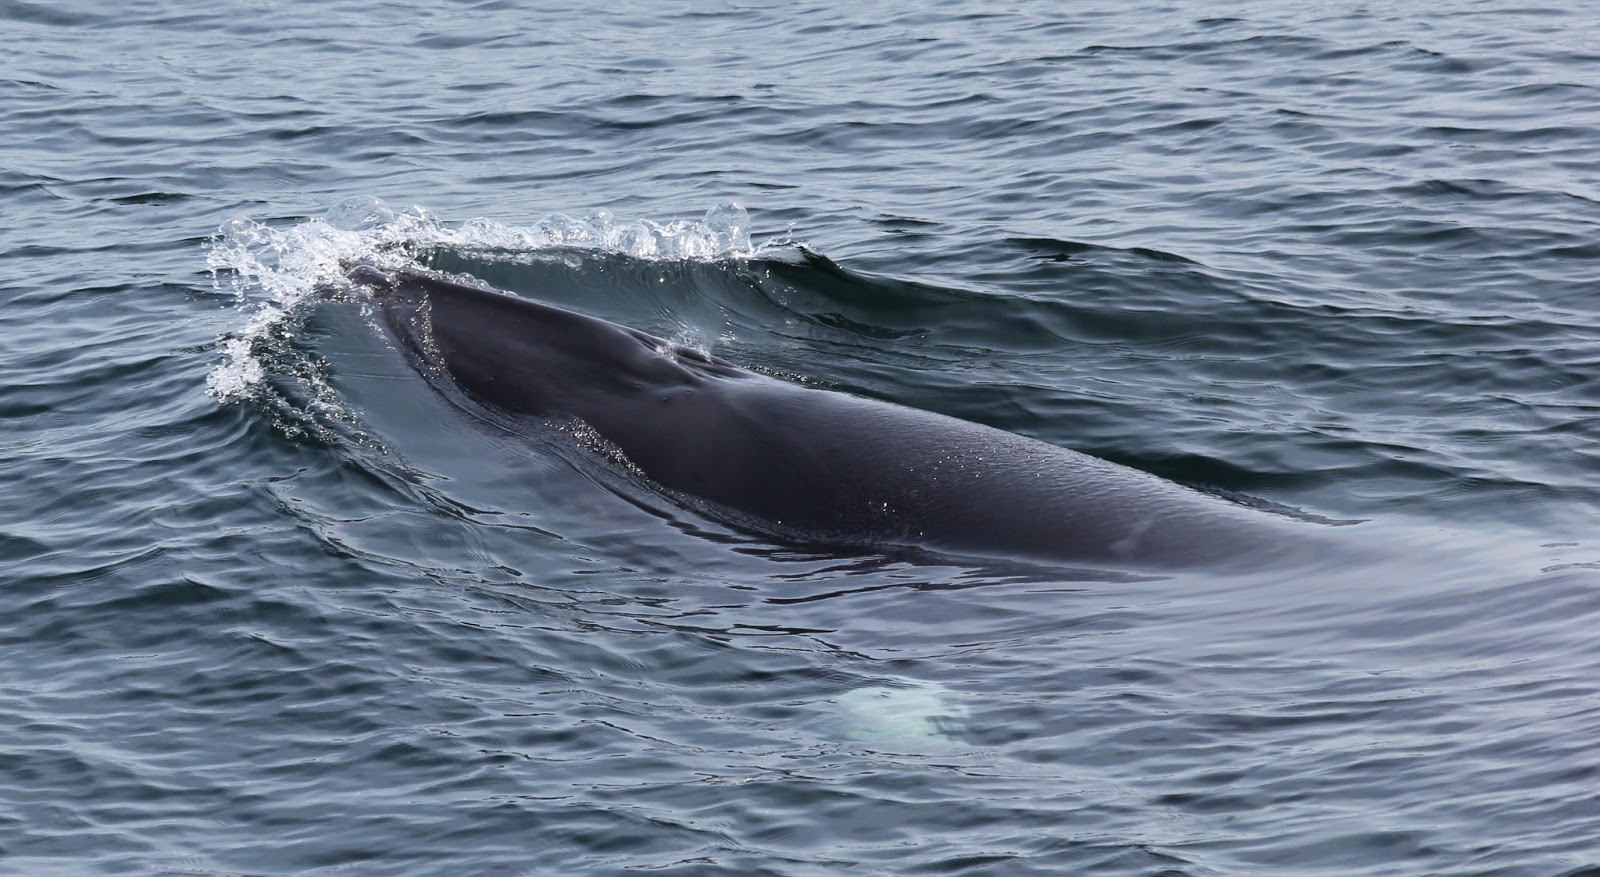 Blue Ocean Society's Whale Sightings July 22, Captain's